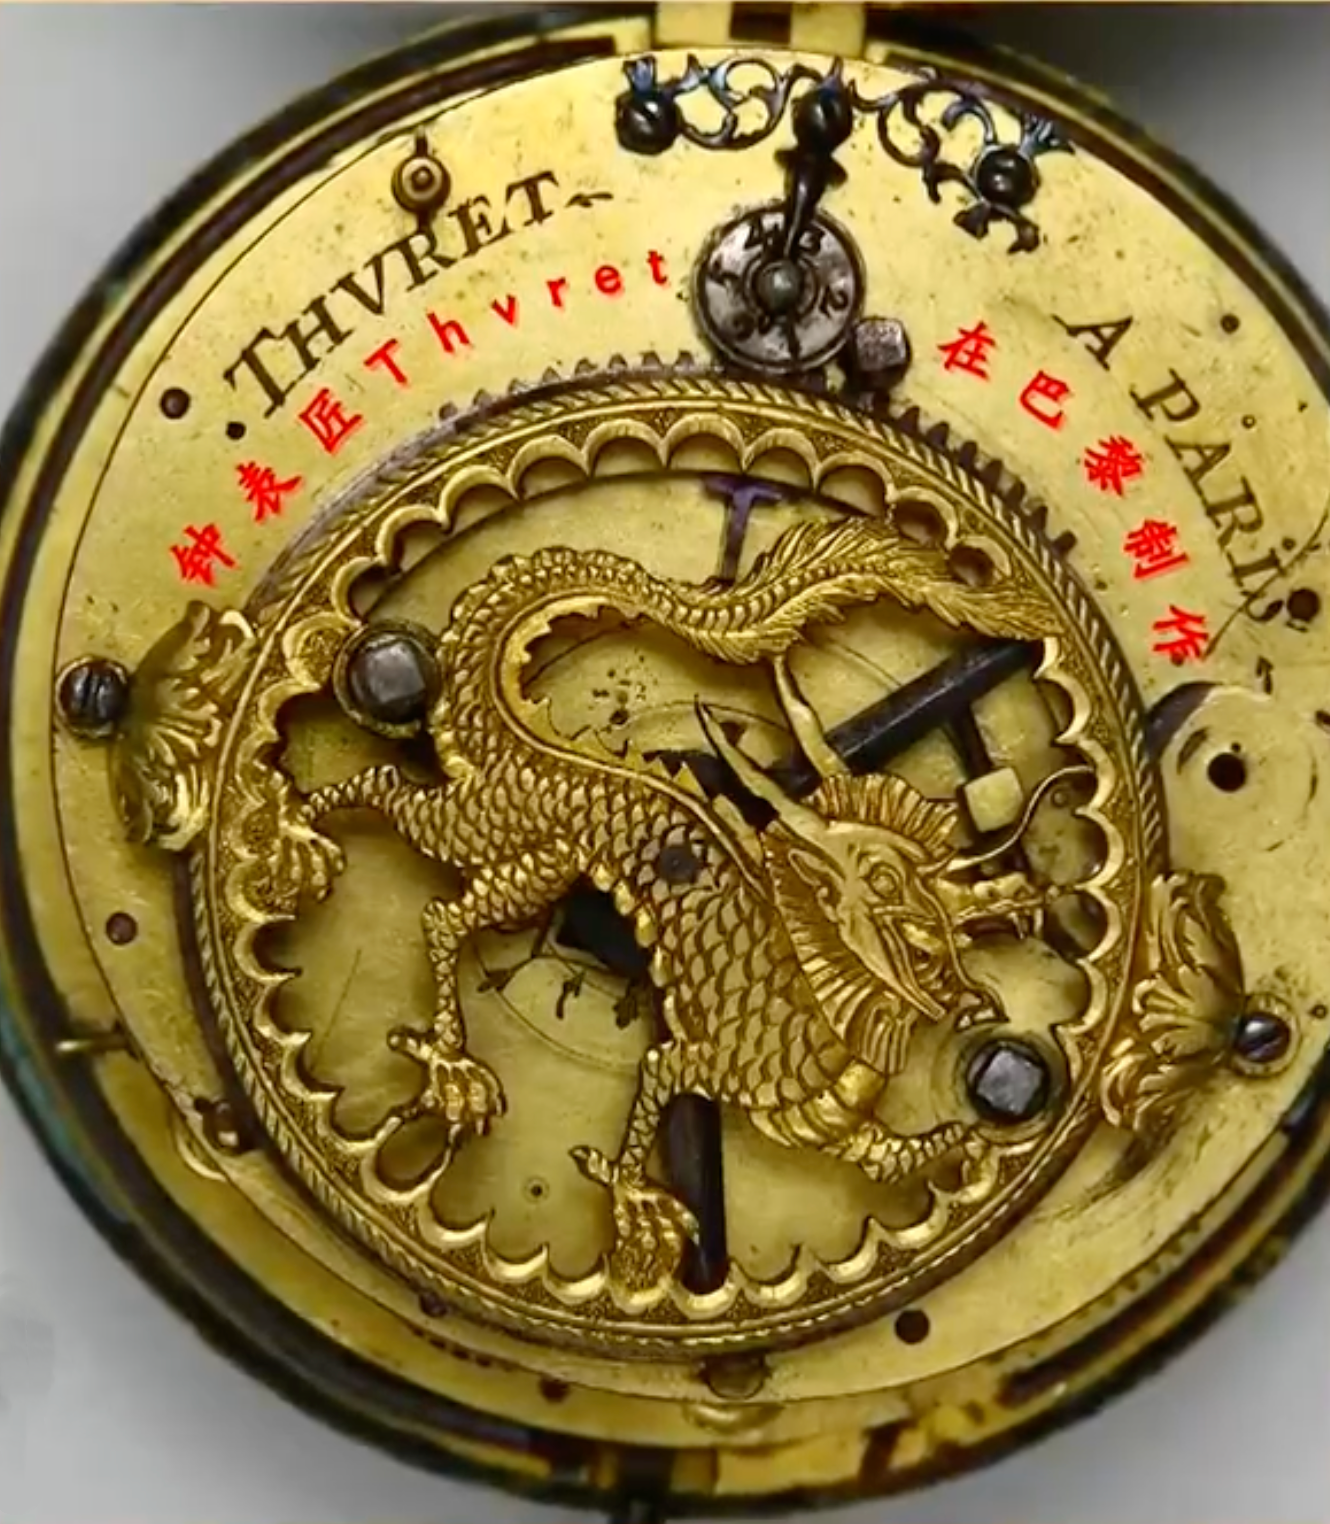 A closer look shows a detail of the pocket watch. /CMG